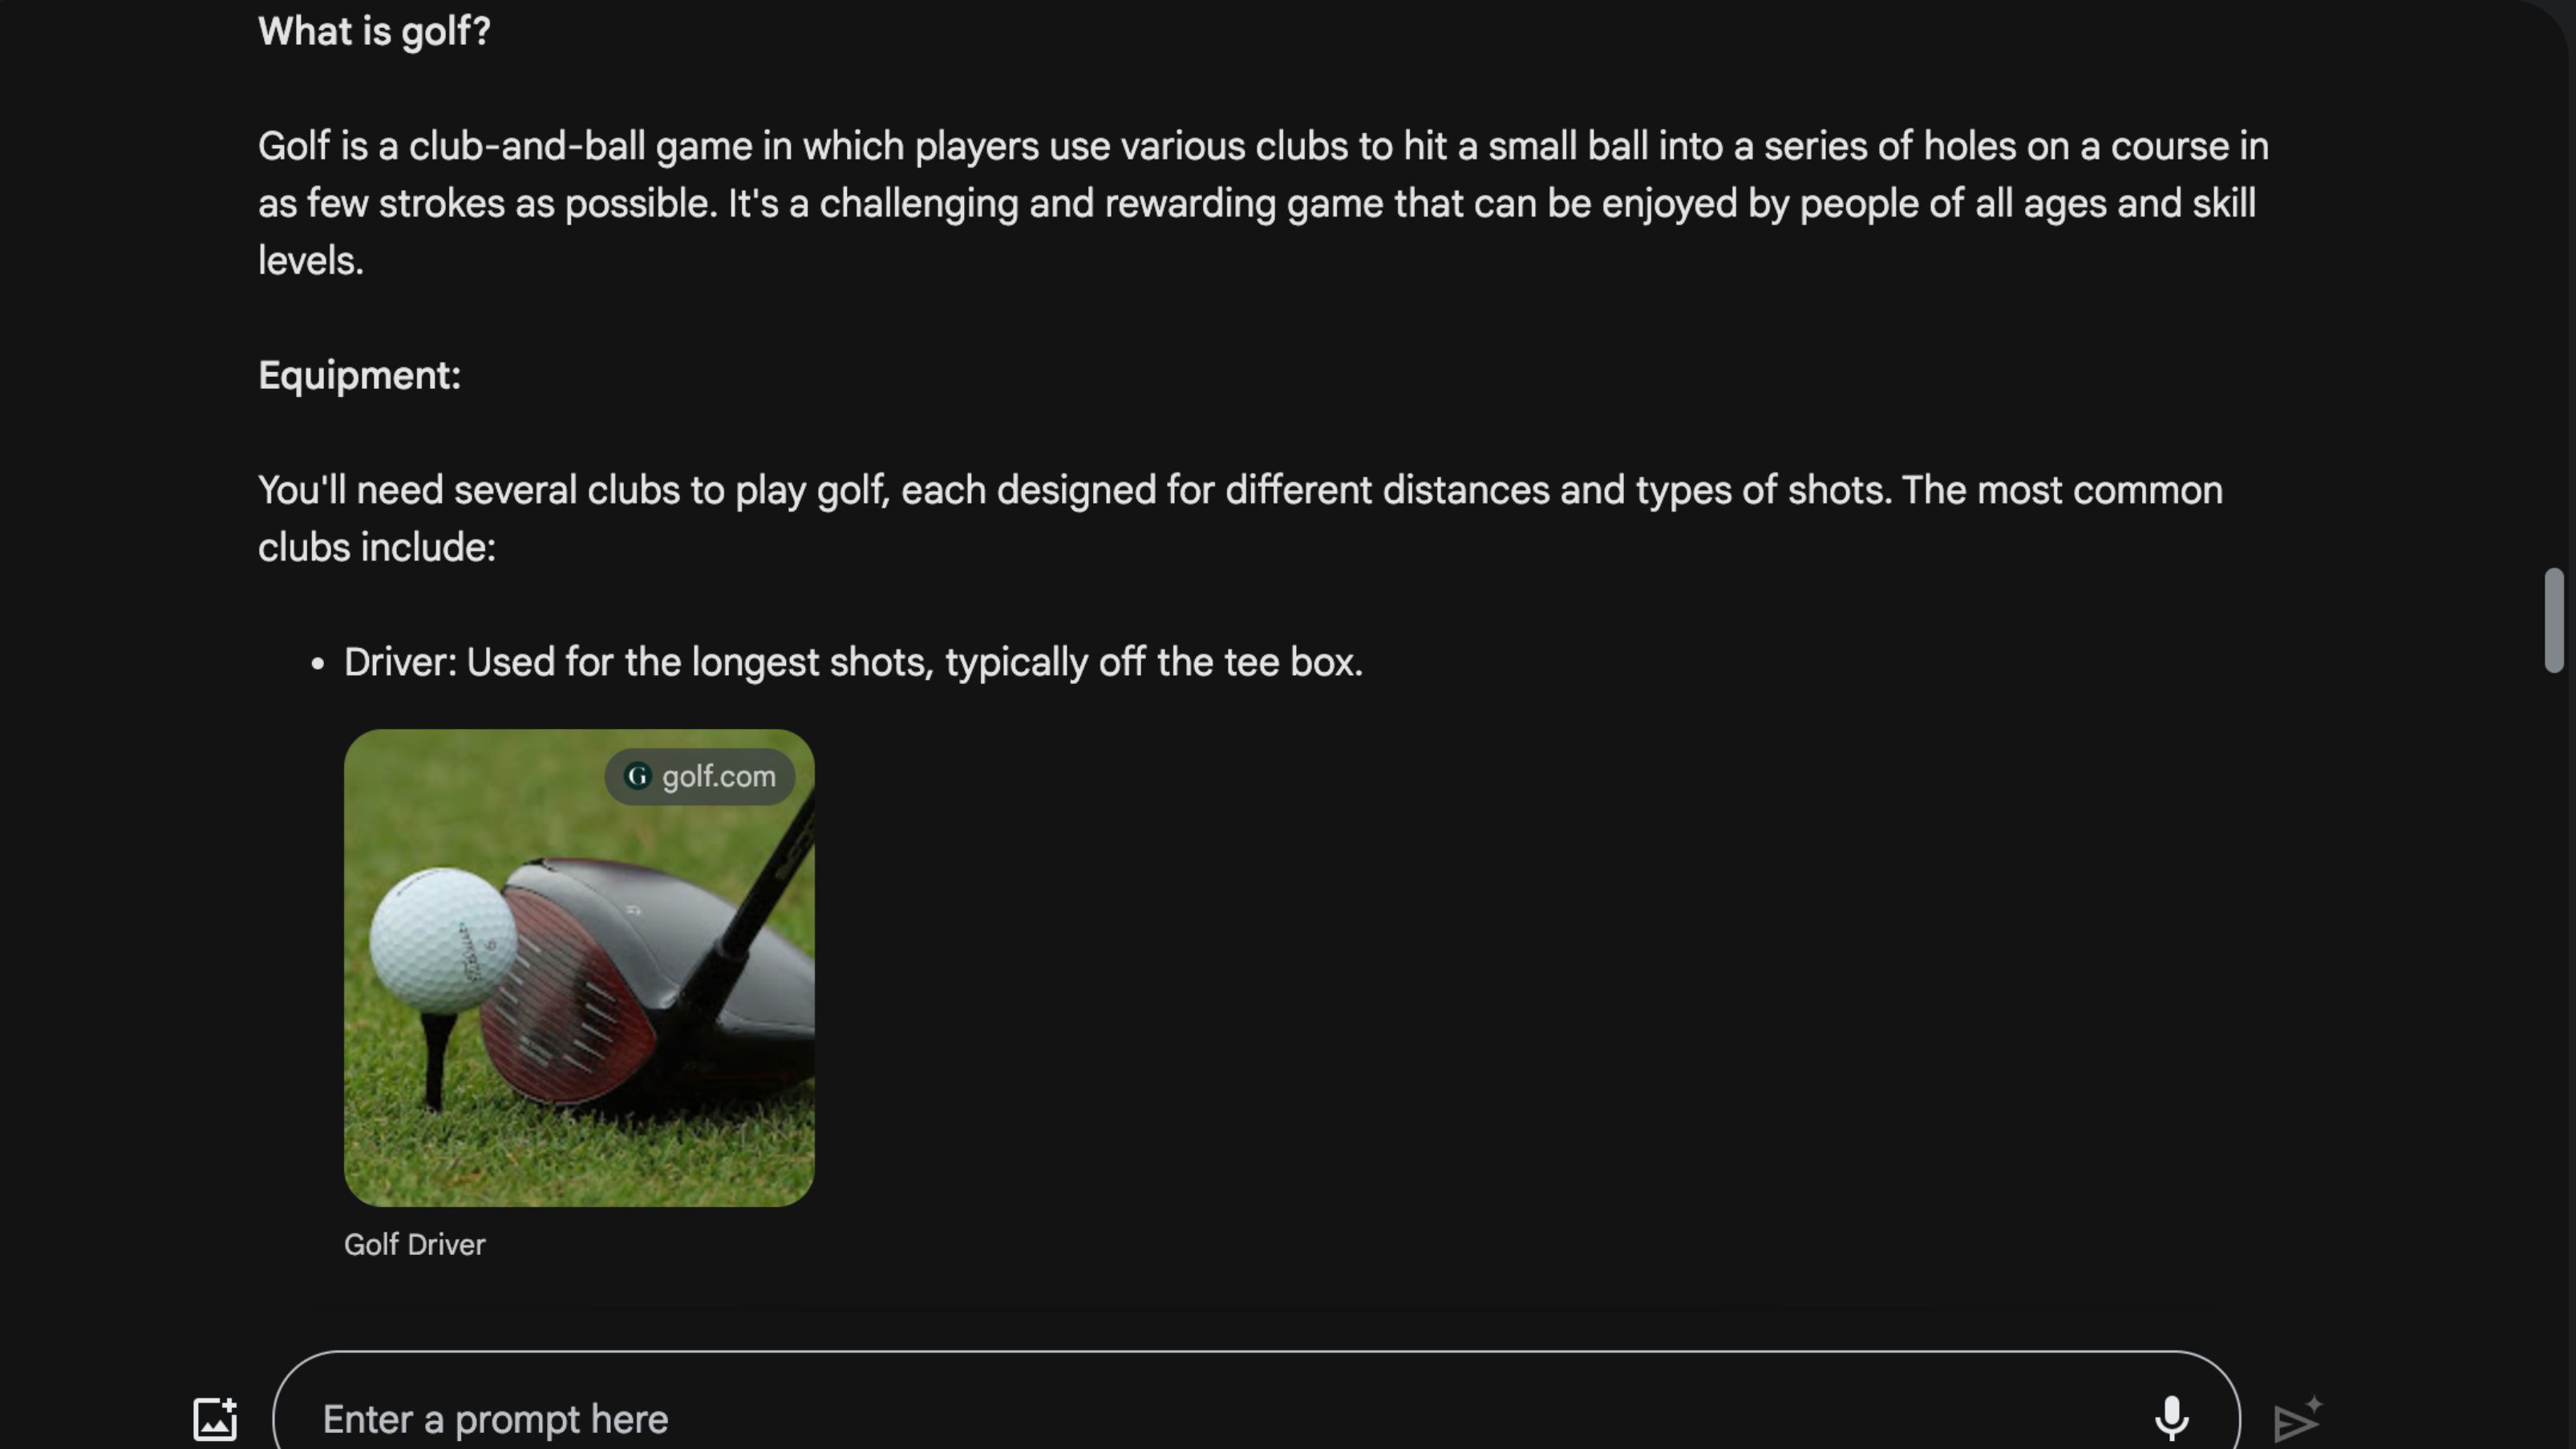 Google Bard answering what is golf